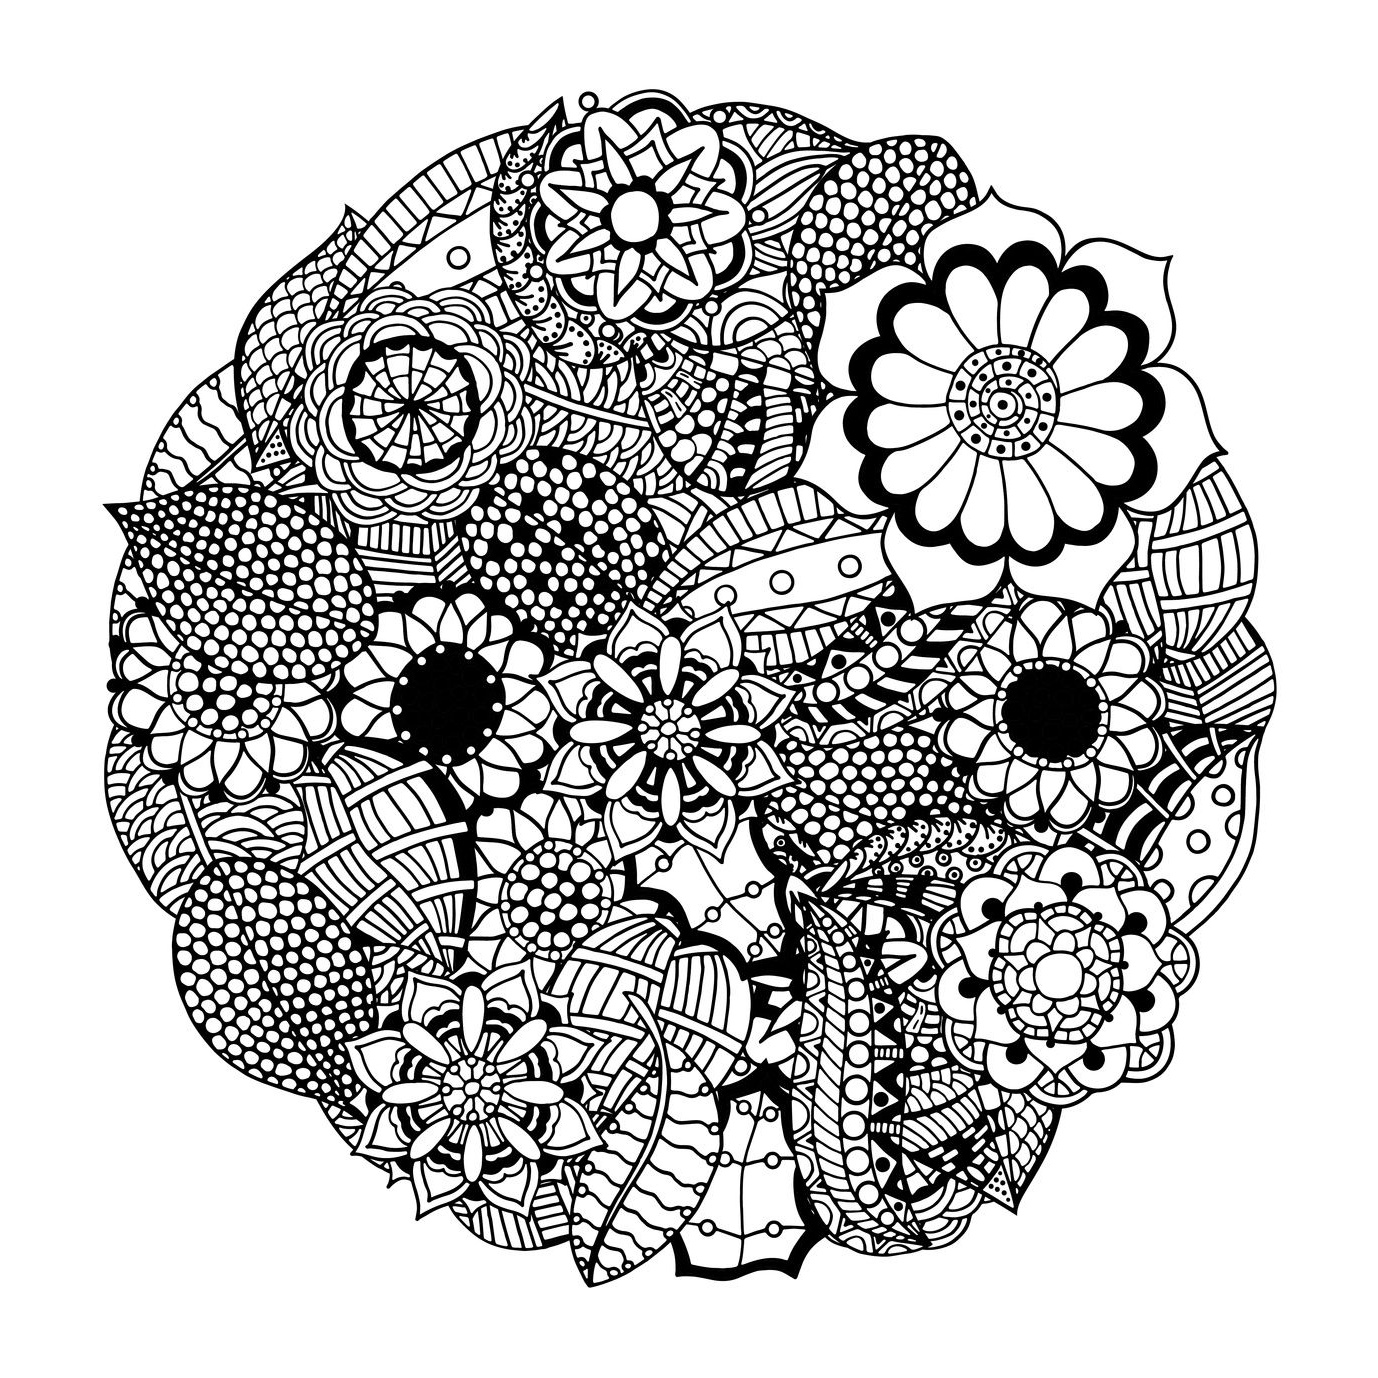 Mandala Difficile Impressionnant Stock these Printable Abstract Coloring Pages Relieve Stress and